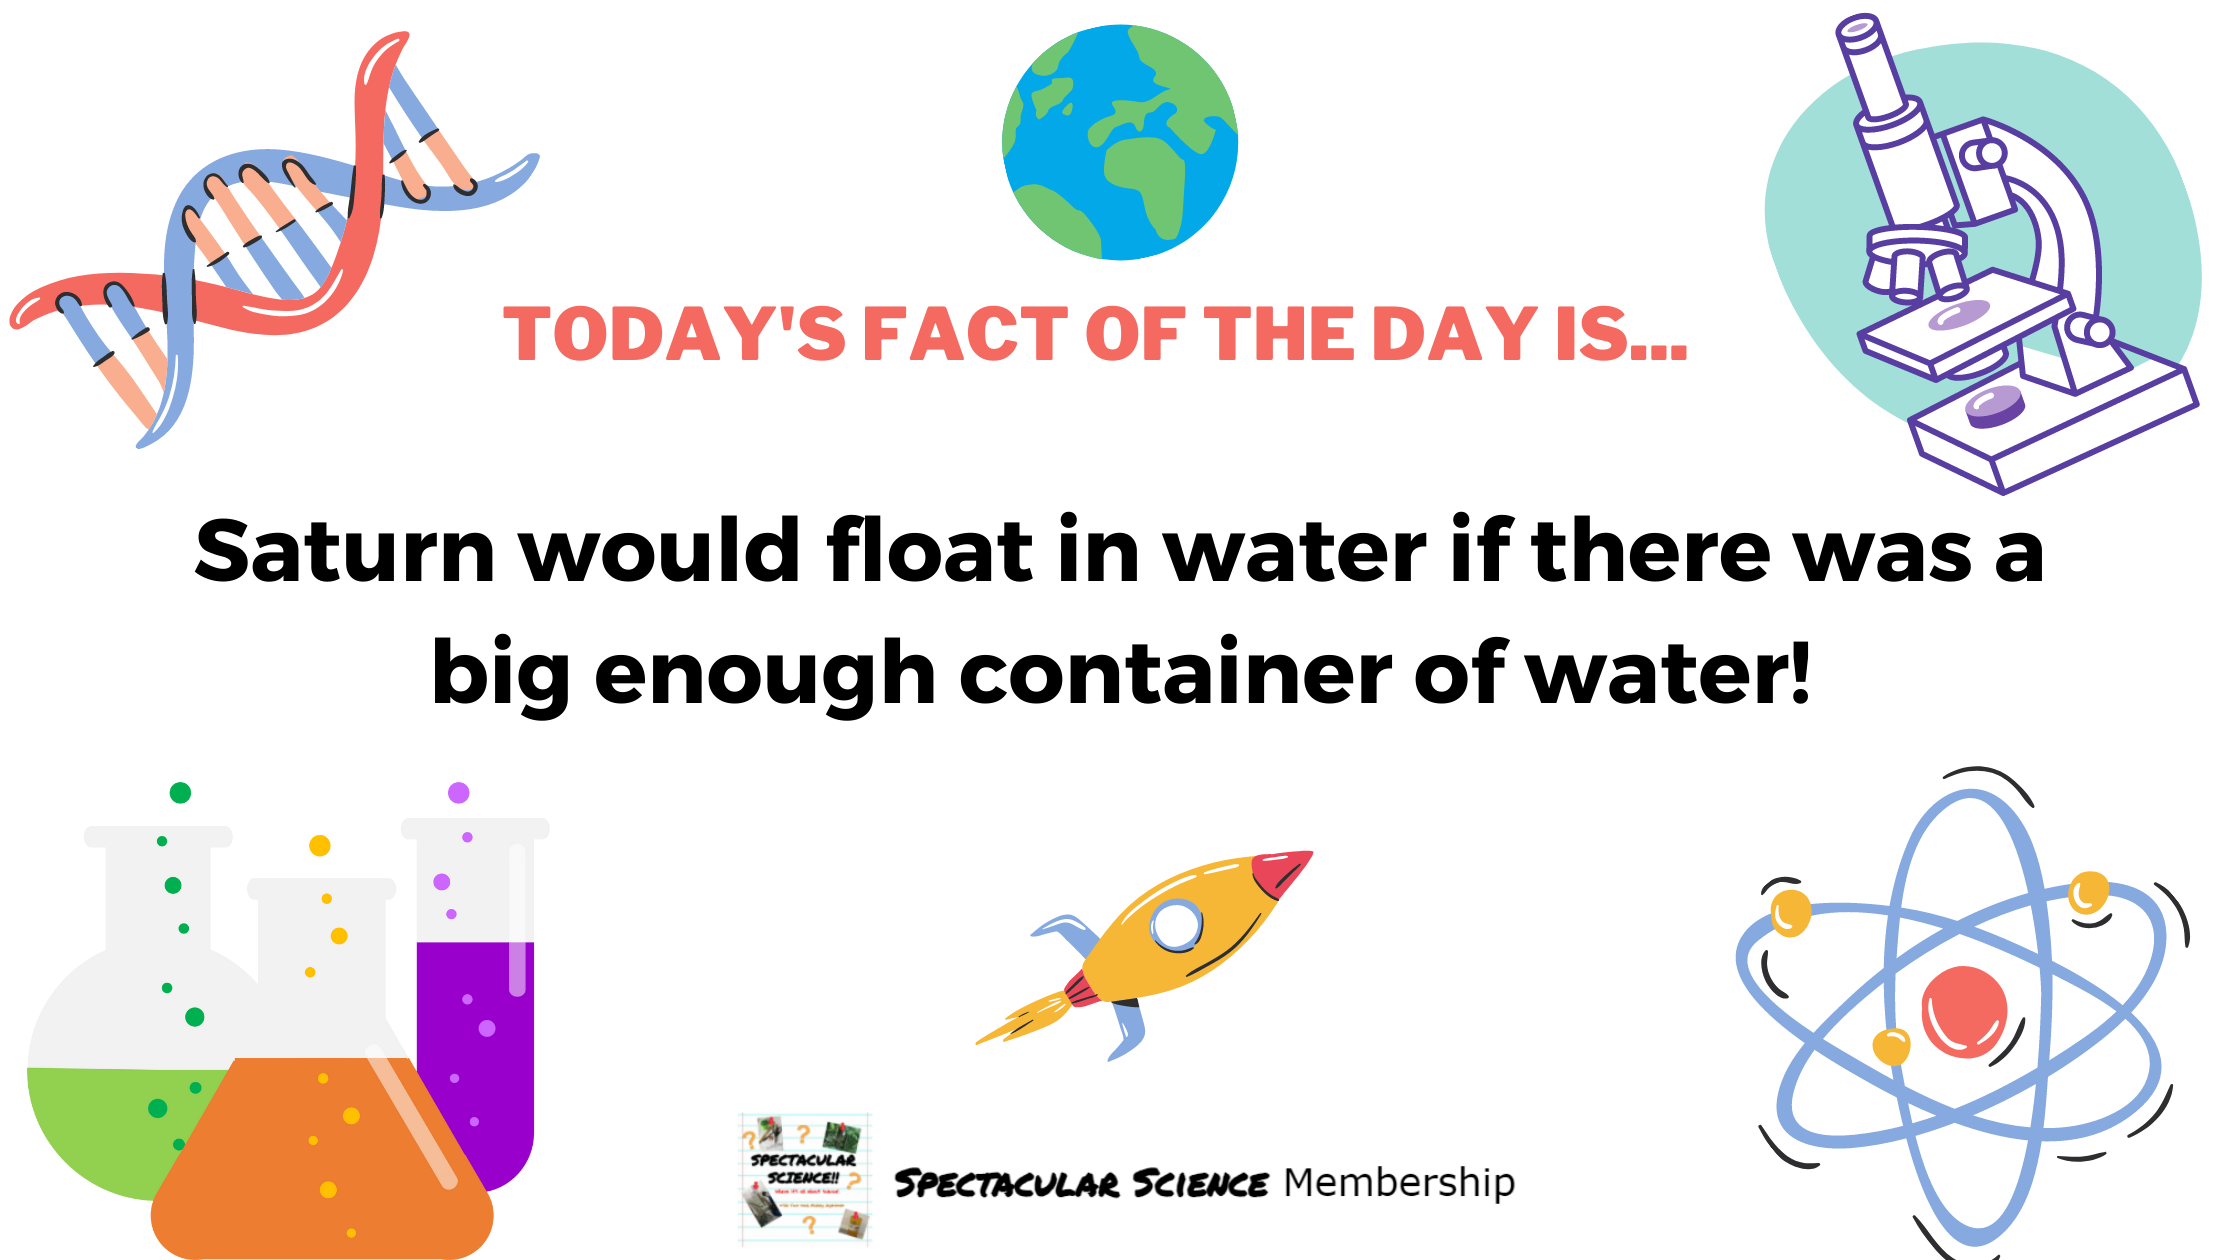 Fact of the Day Image Nov. 16th